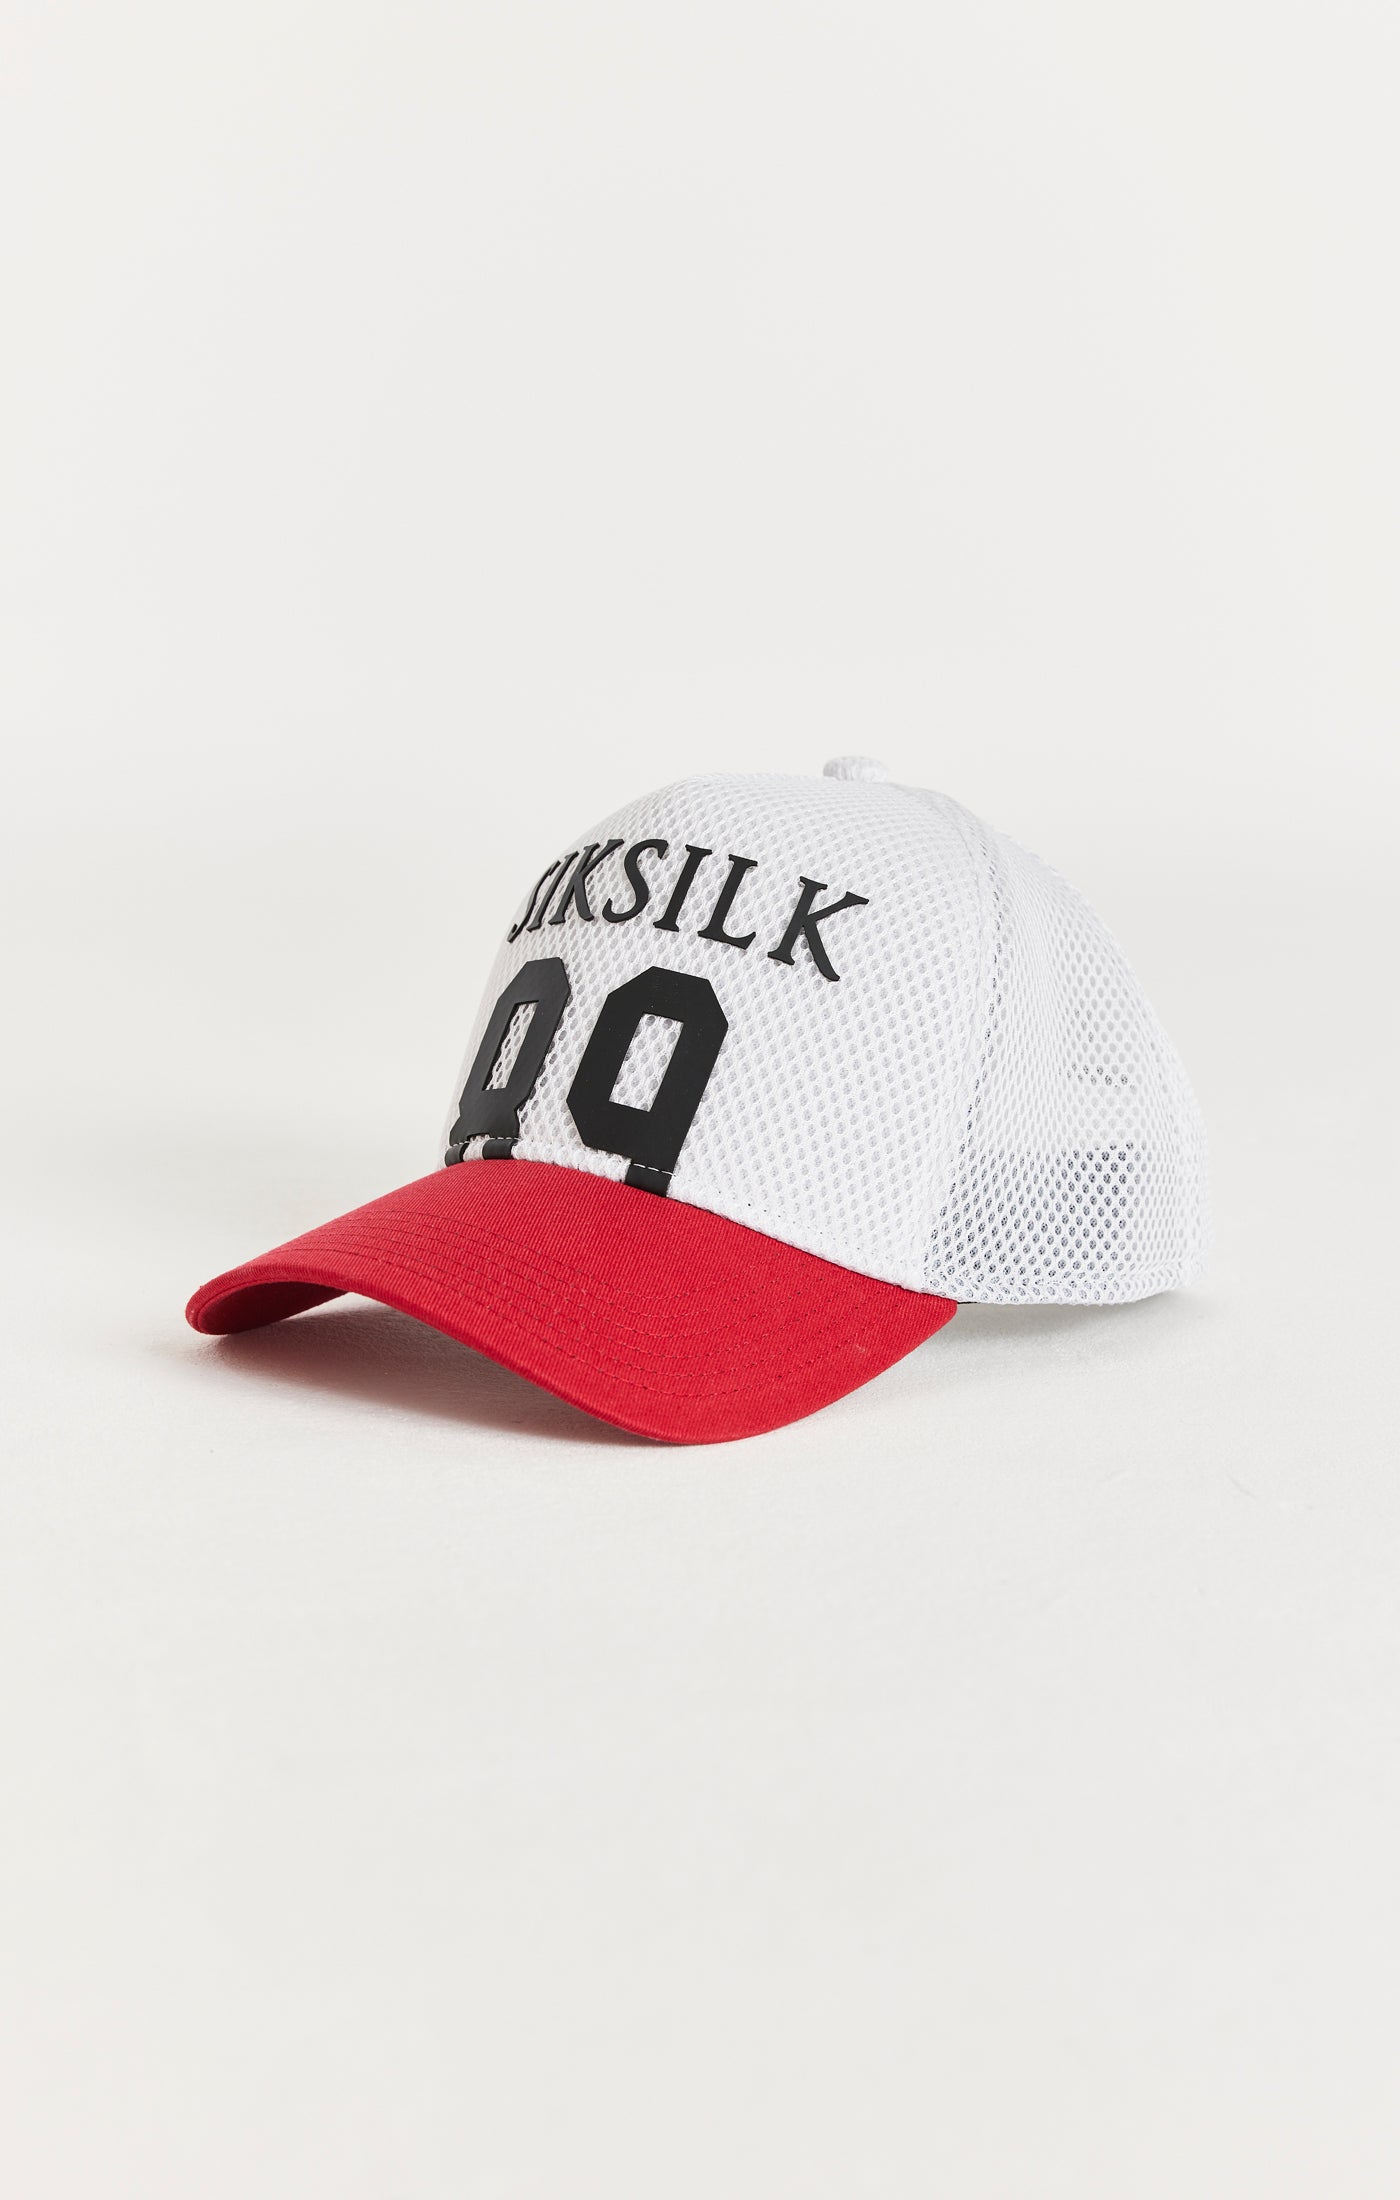 Load image into Gallery viewer, White Full Mesh 89 Trucker Cap